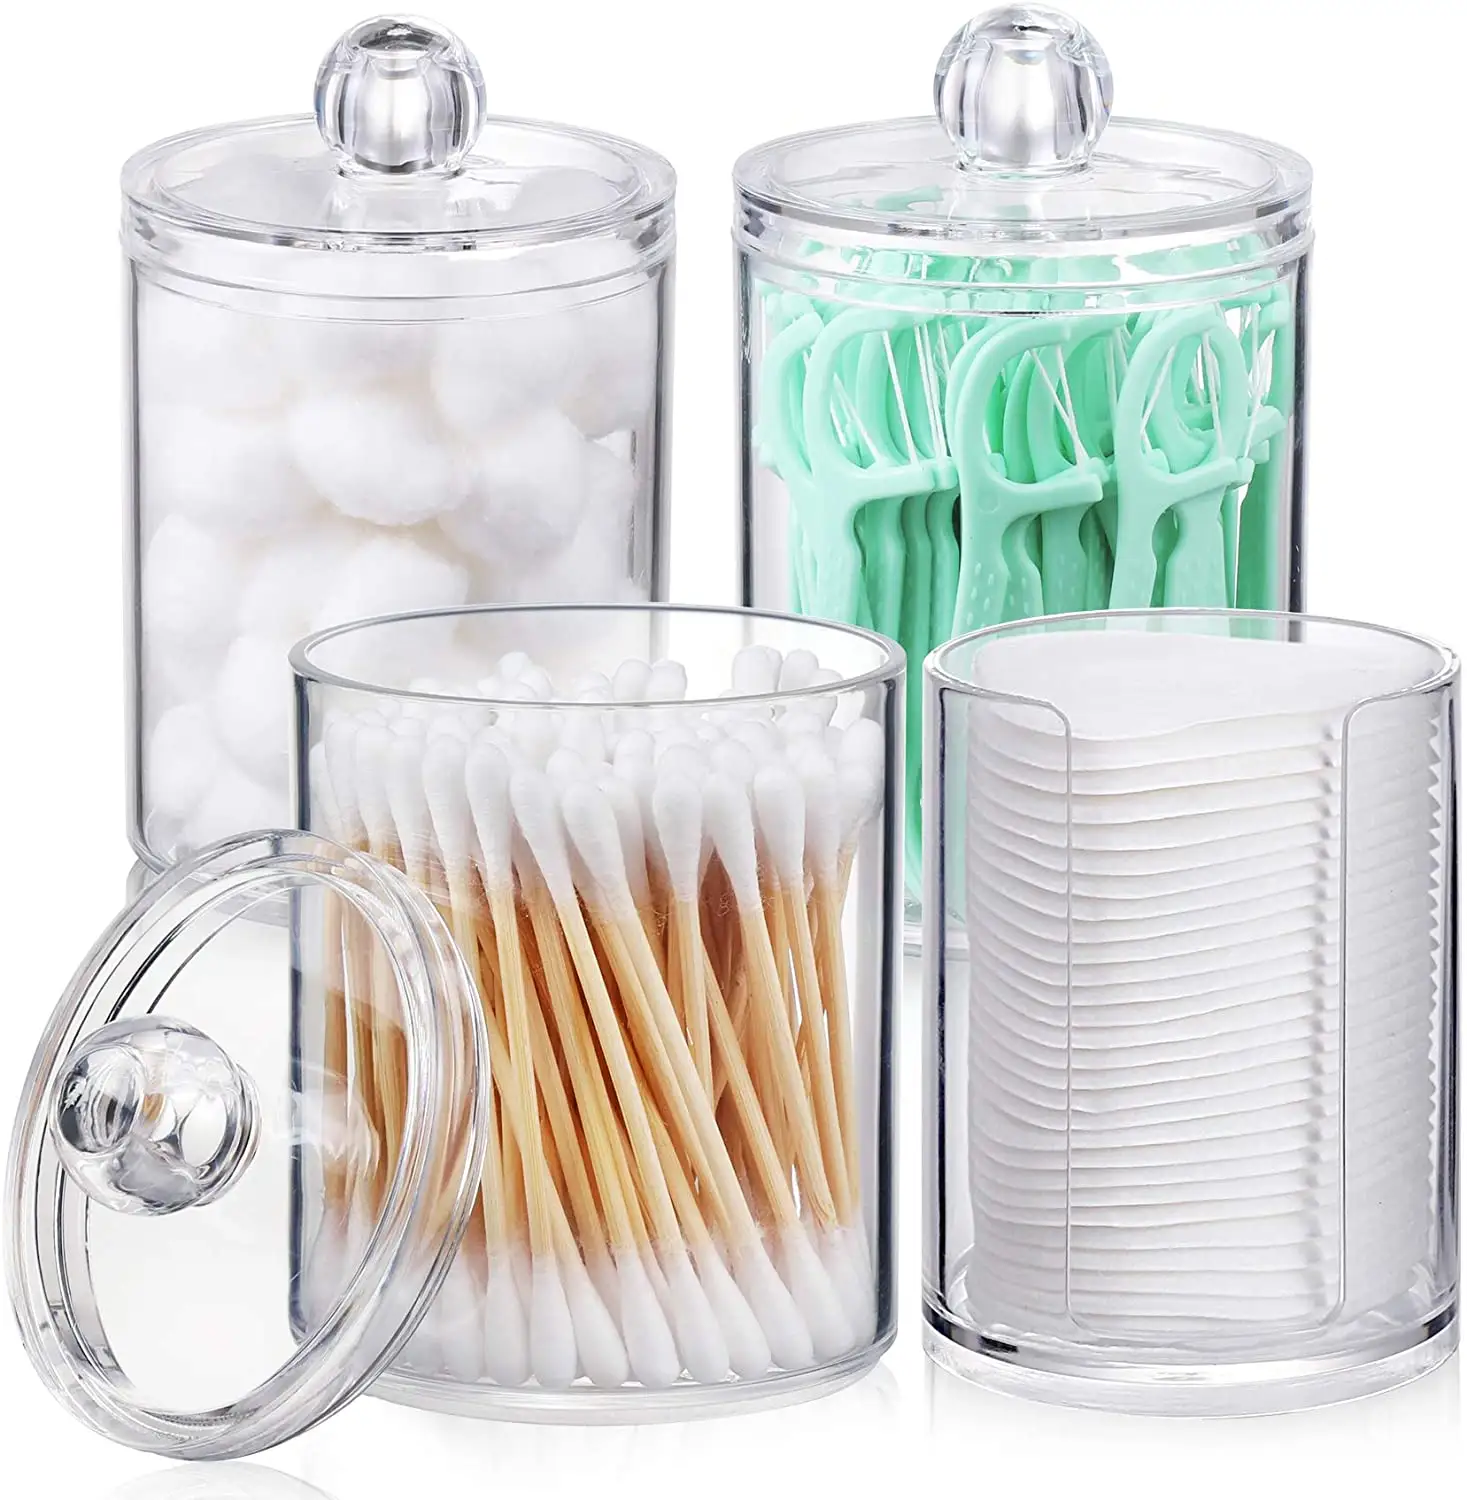 High Clear Bathroom Organizer Storage Jars Canisters for Cotton Swab Cotton Ball Cotton Round Pads Floss 4 Pack Set